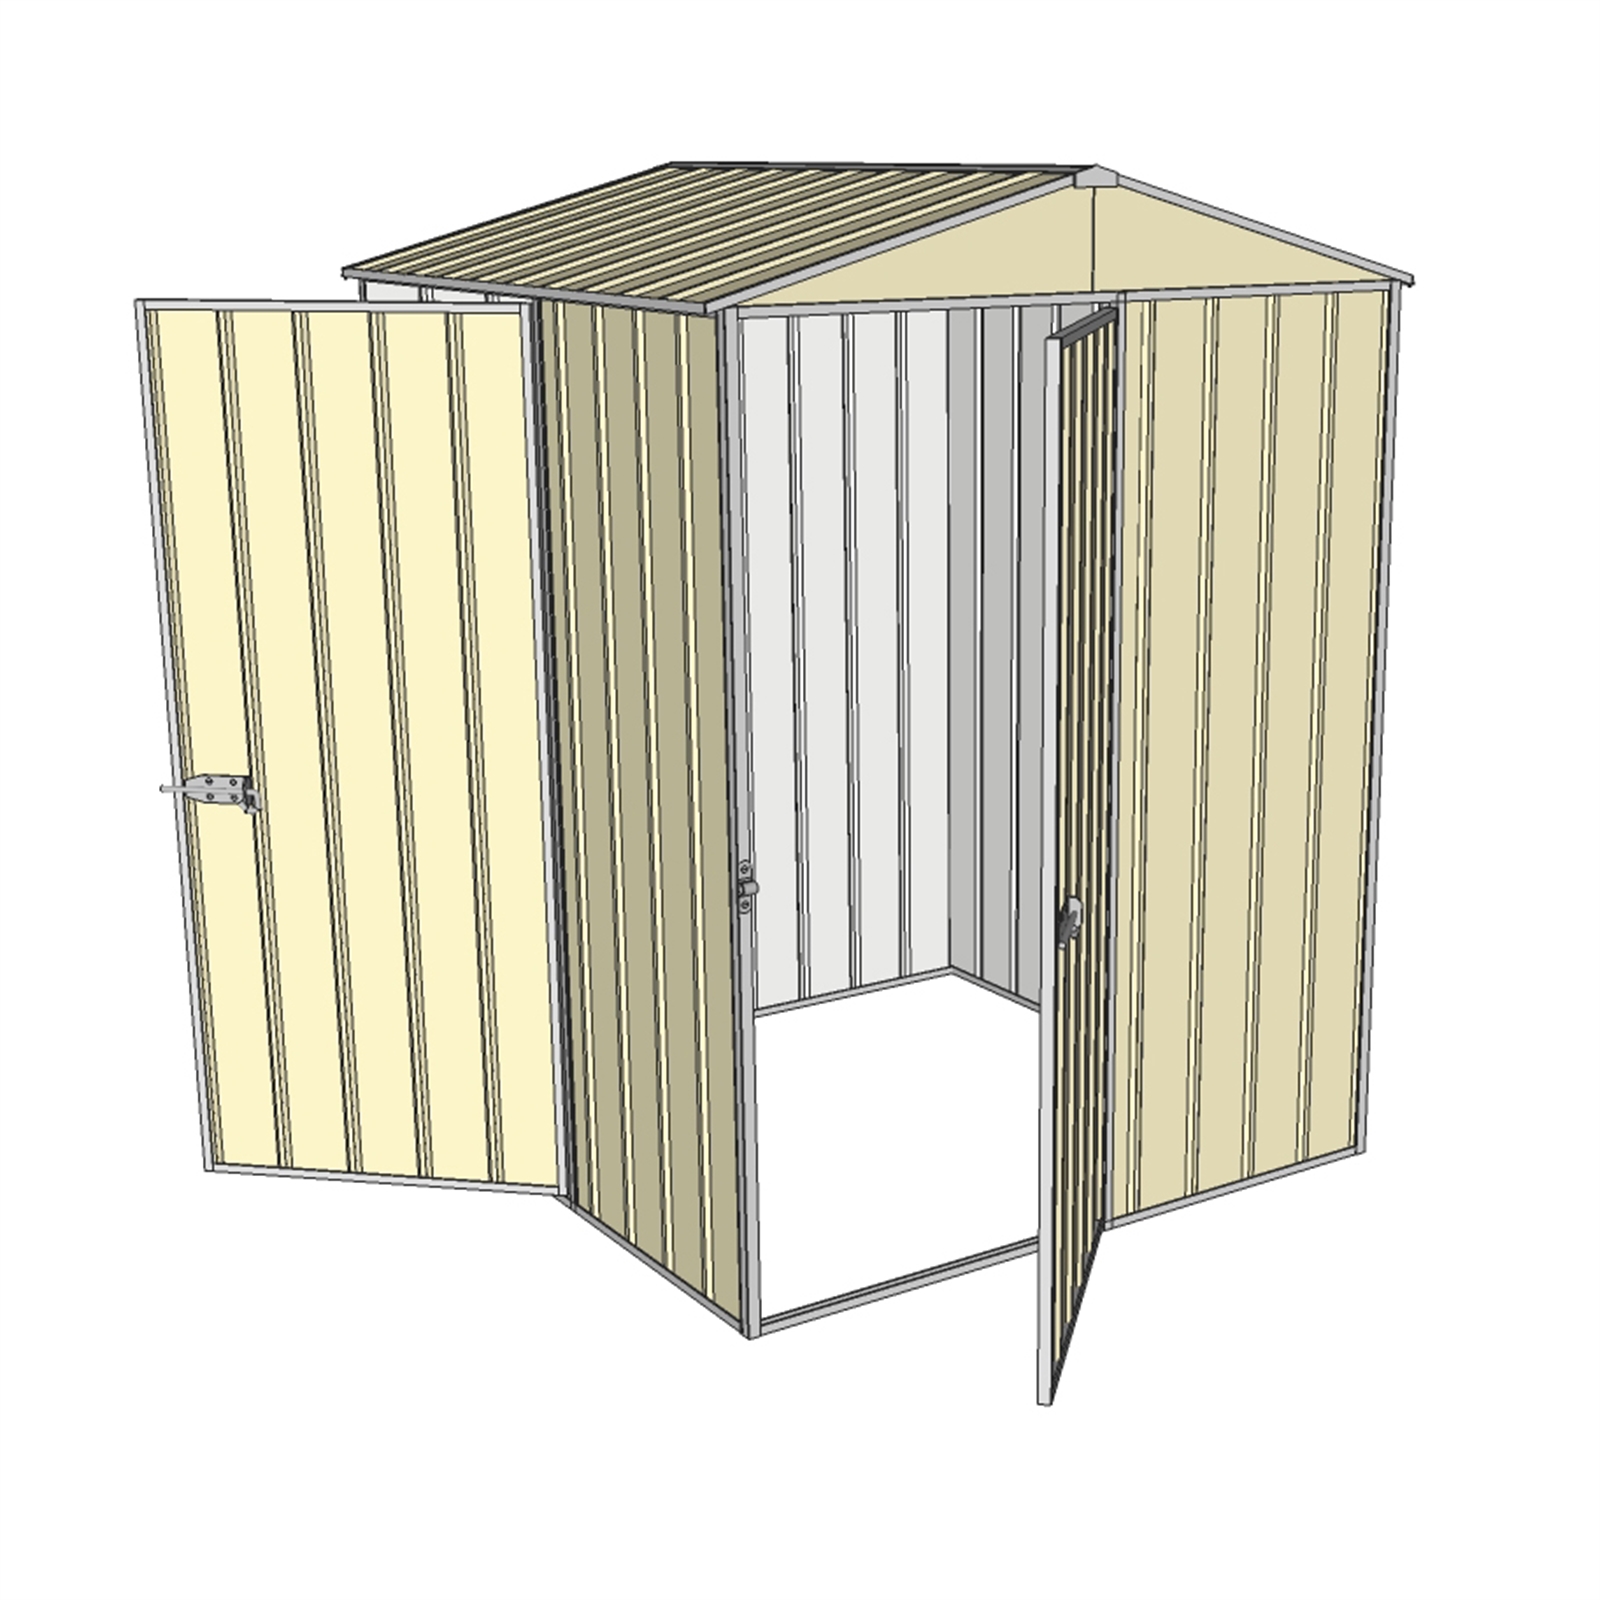 Build-a-Shed 1.5 x 2.3 x 1.5m Cream Front Gable Two Single Hinged Doors Shed